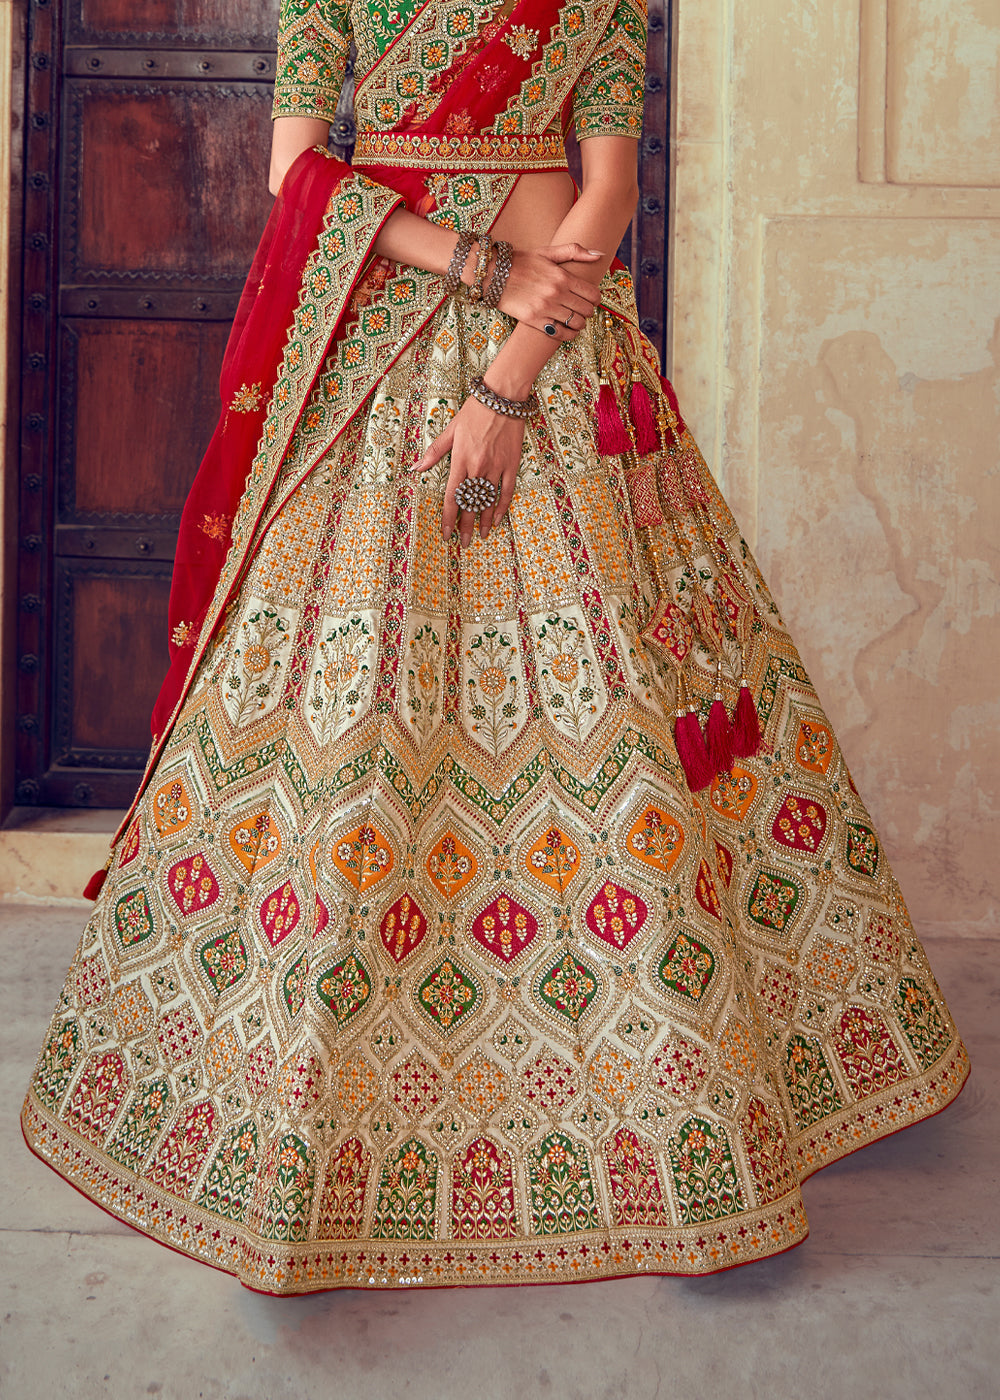 Cognac Red and Green Heavy Embroidered Designer Lehenga